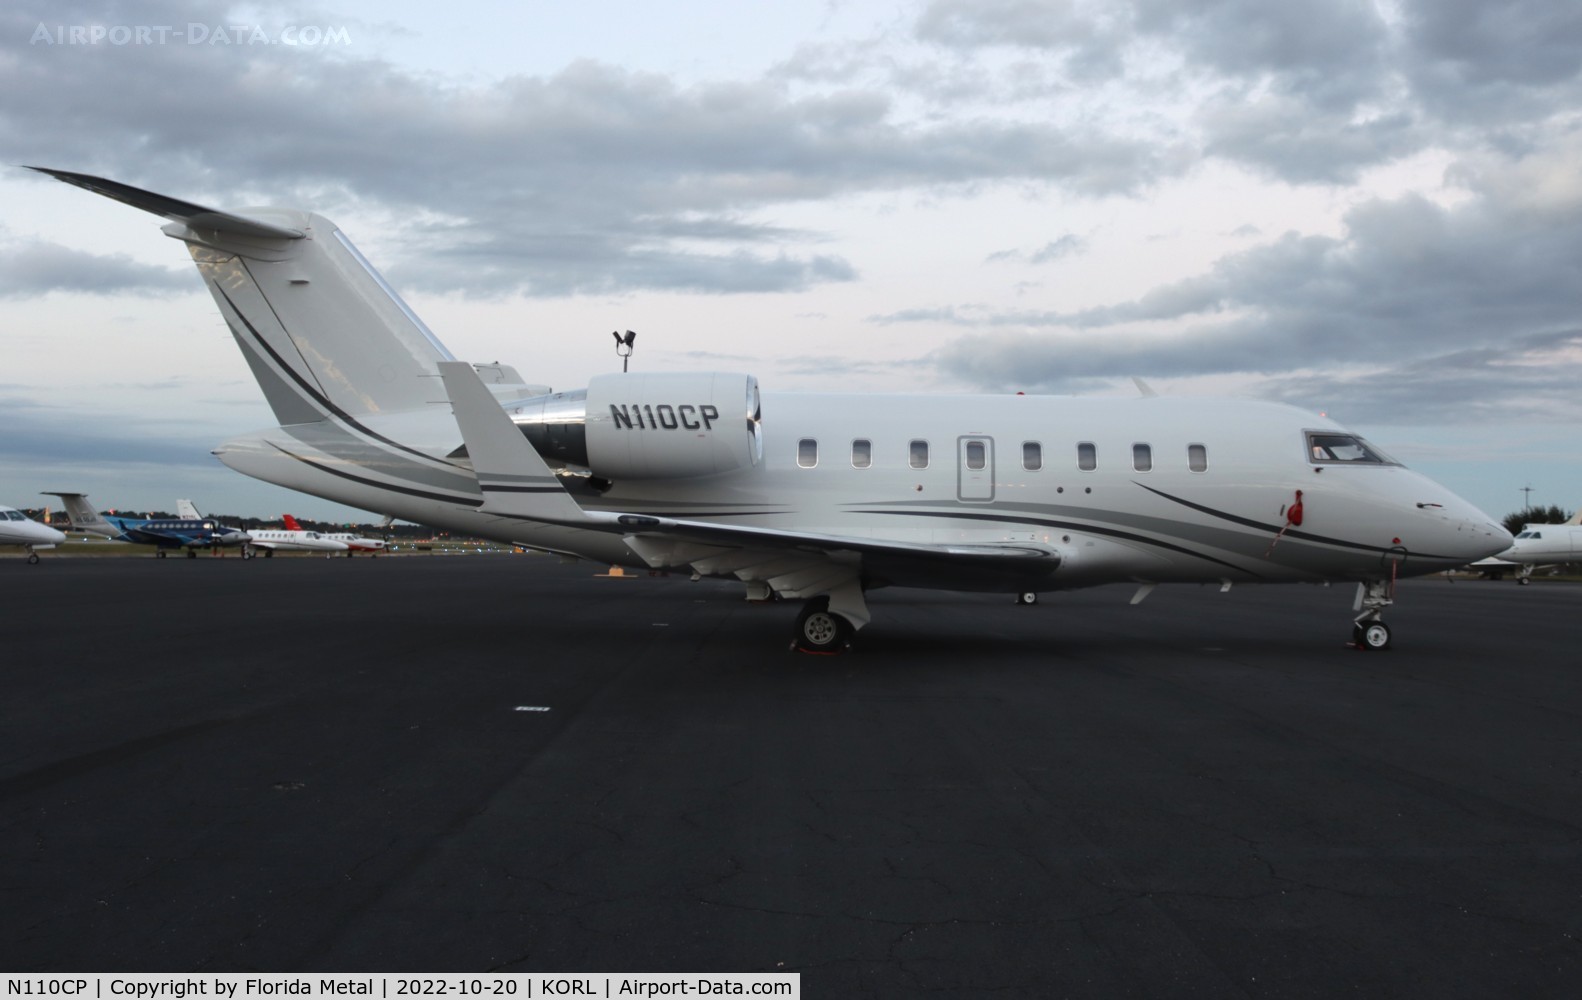 N110CP, 2009 Bombardier Challenger 605 (CL-600-2B16) C/N 5801, Challenger 605 zx